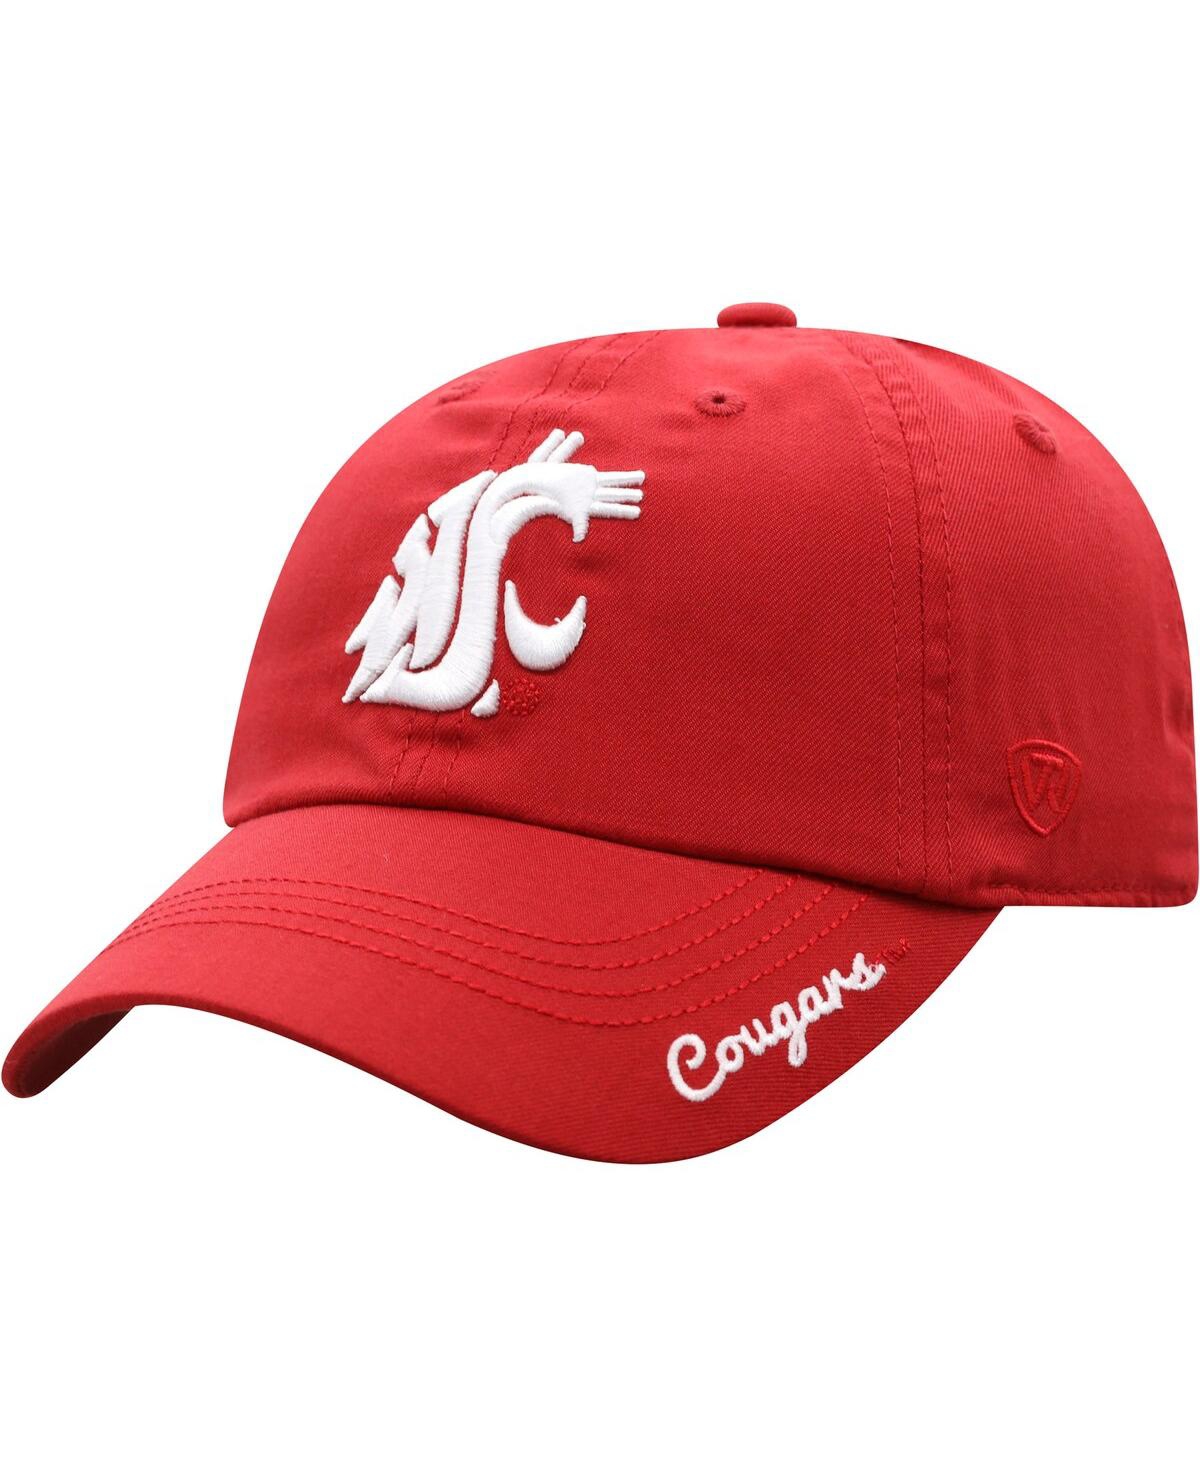 Shop Top Of The World Women's  Cardinal Washington State Cougars Staple Adjustable Hat